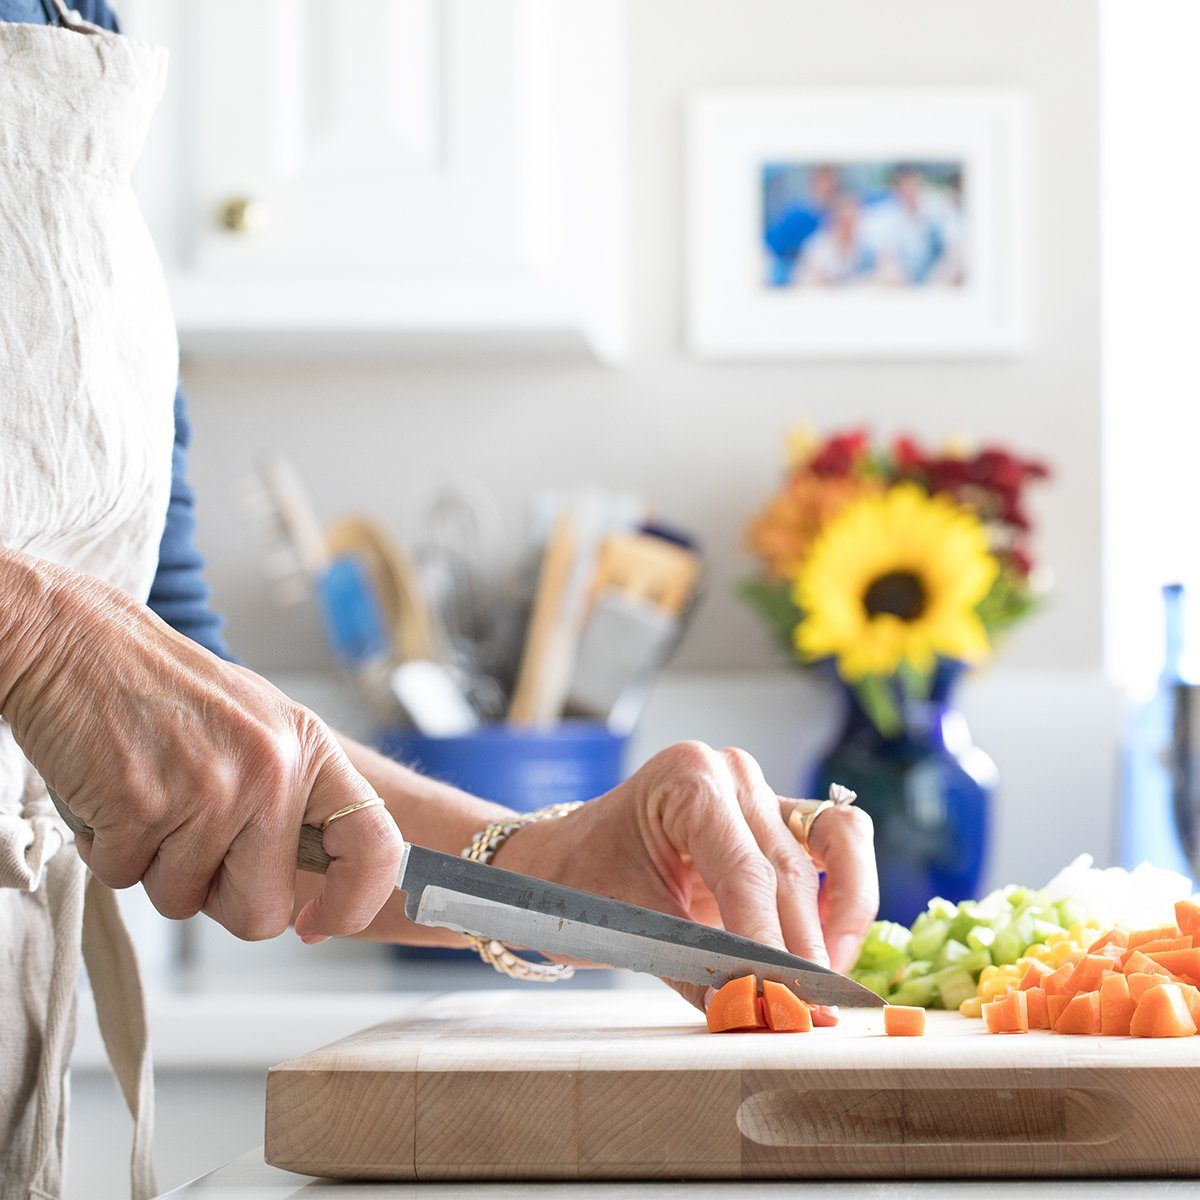 Close up photo of a woman chopping vegetables on a cutting board in a white kitchen with blue accents.